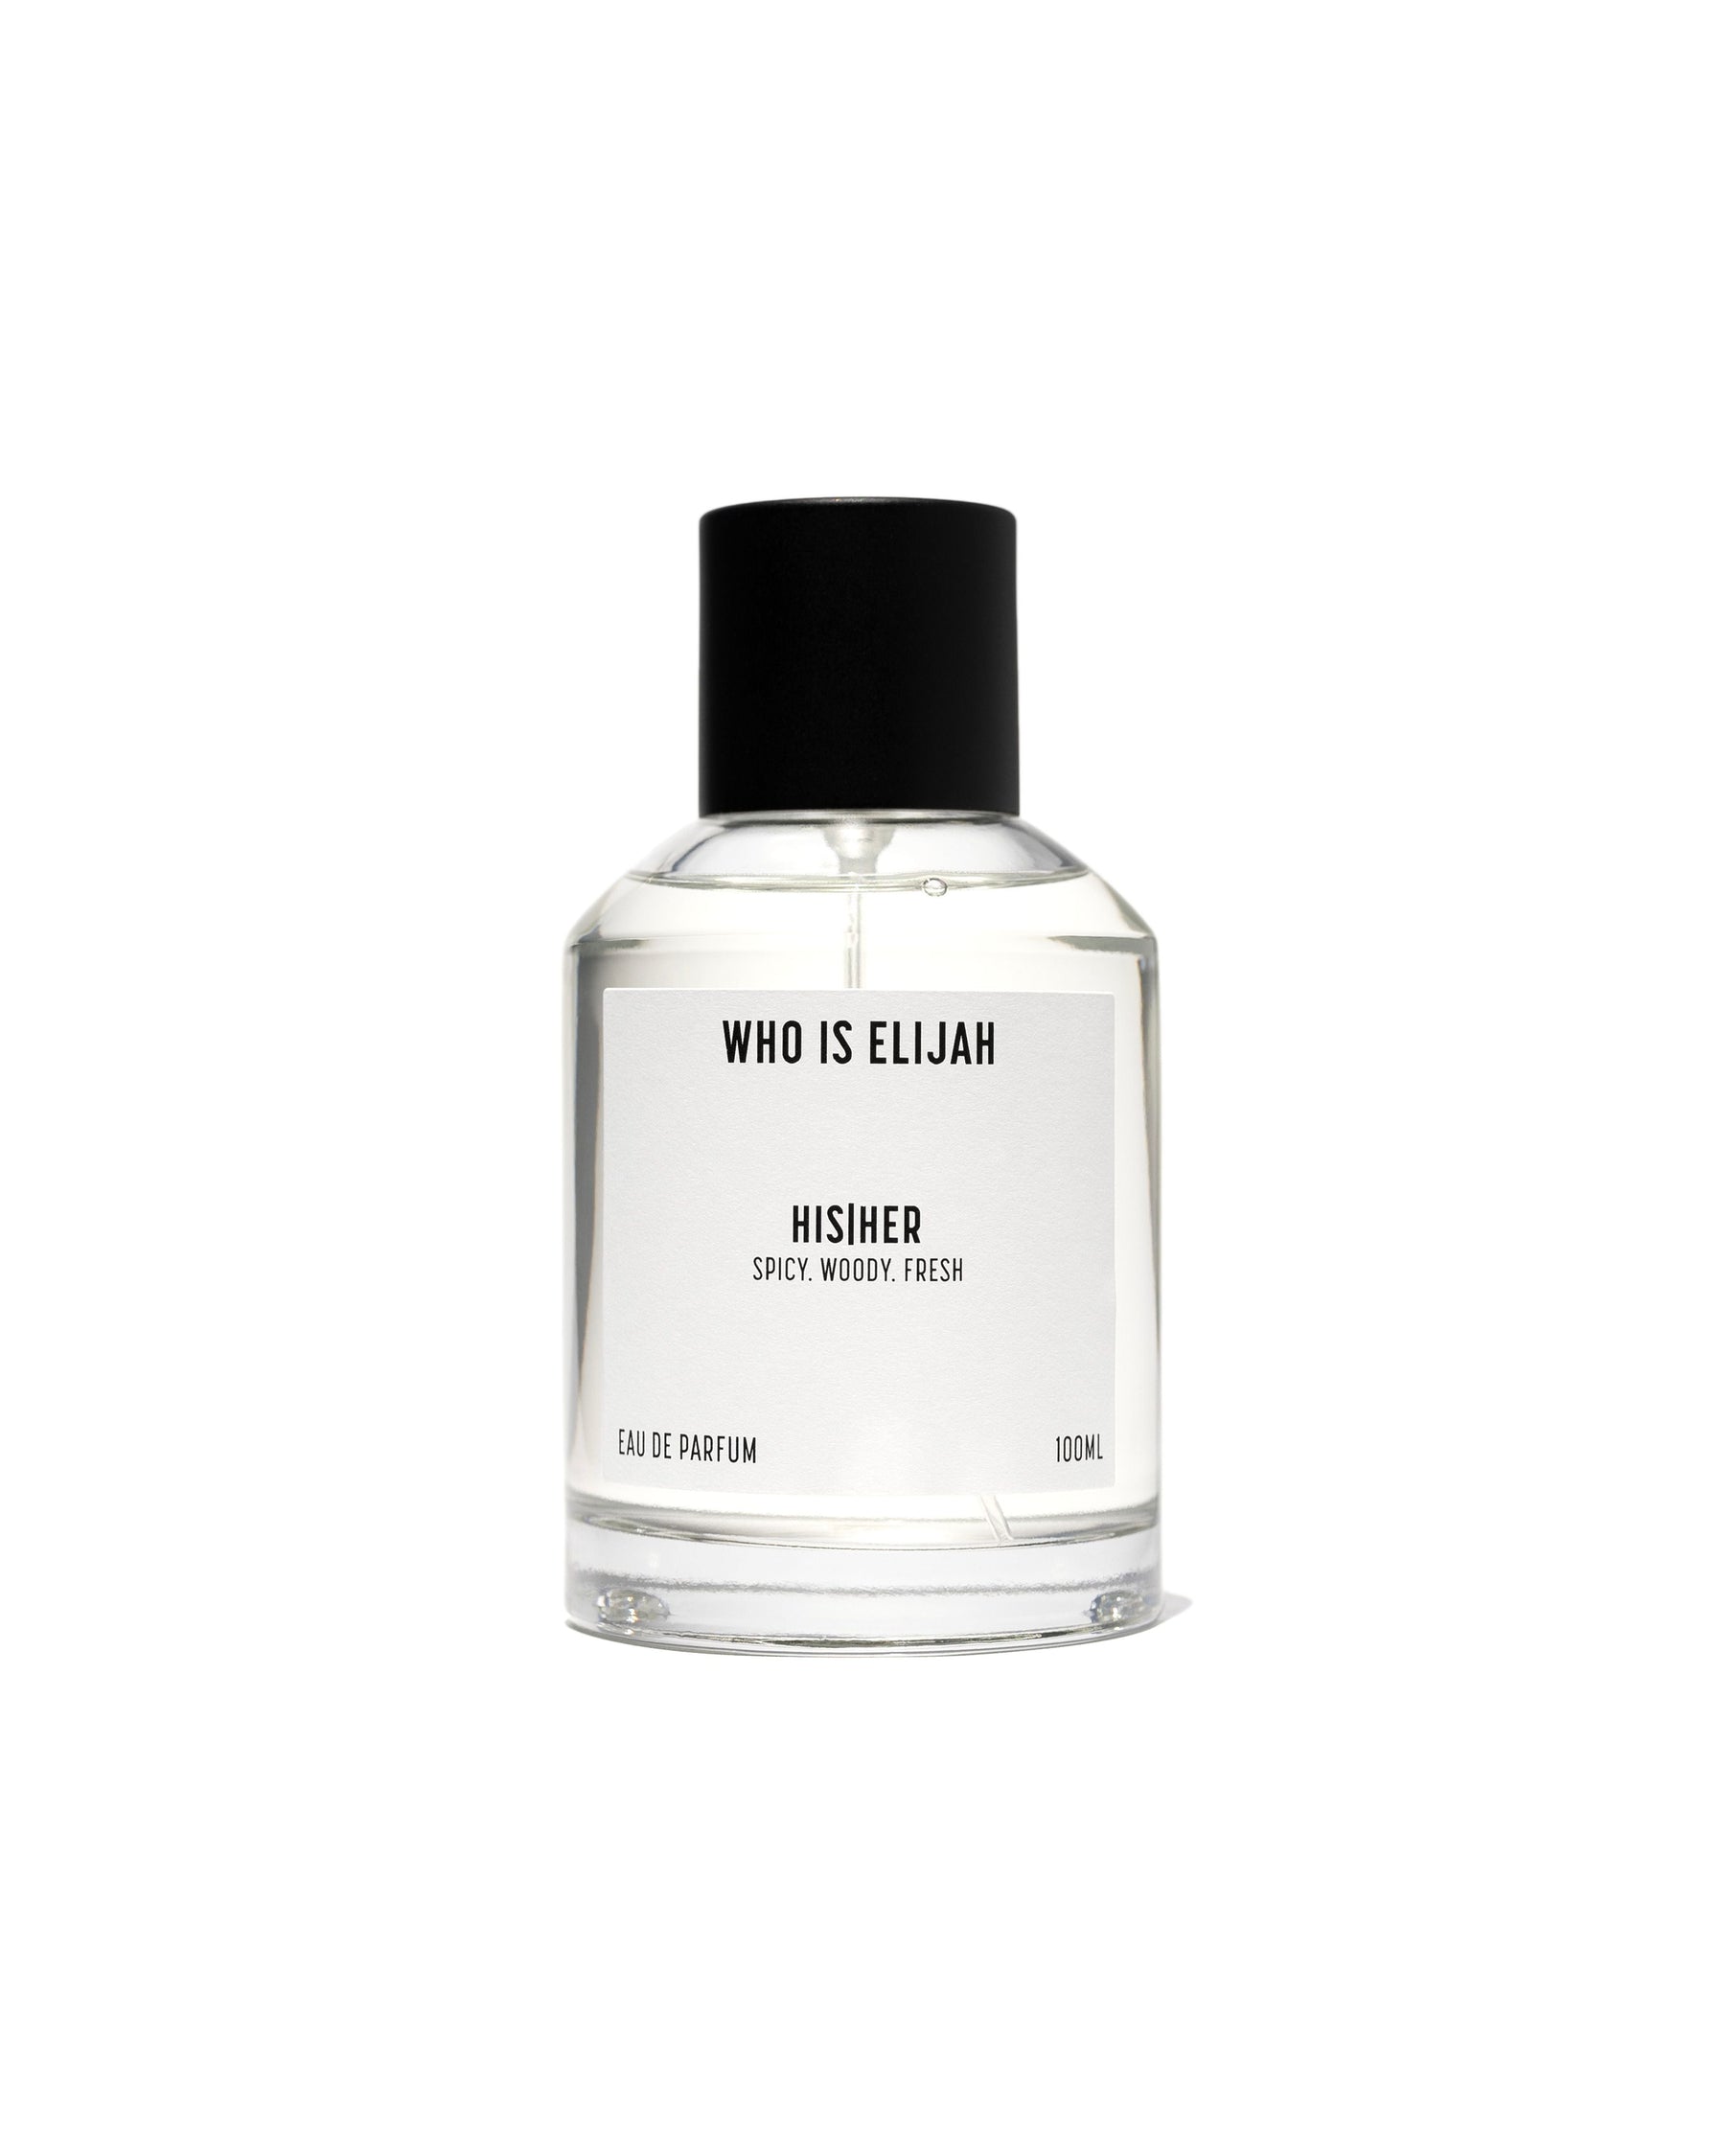 Who is Elijah His Her 10ml-50ml